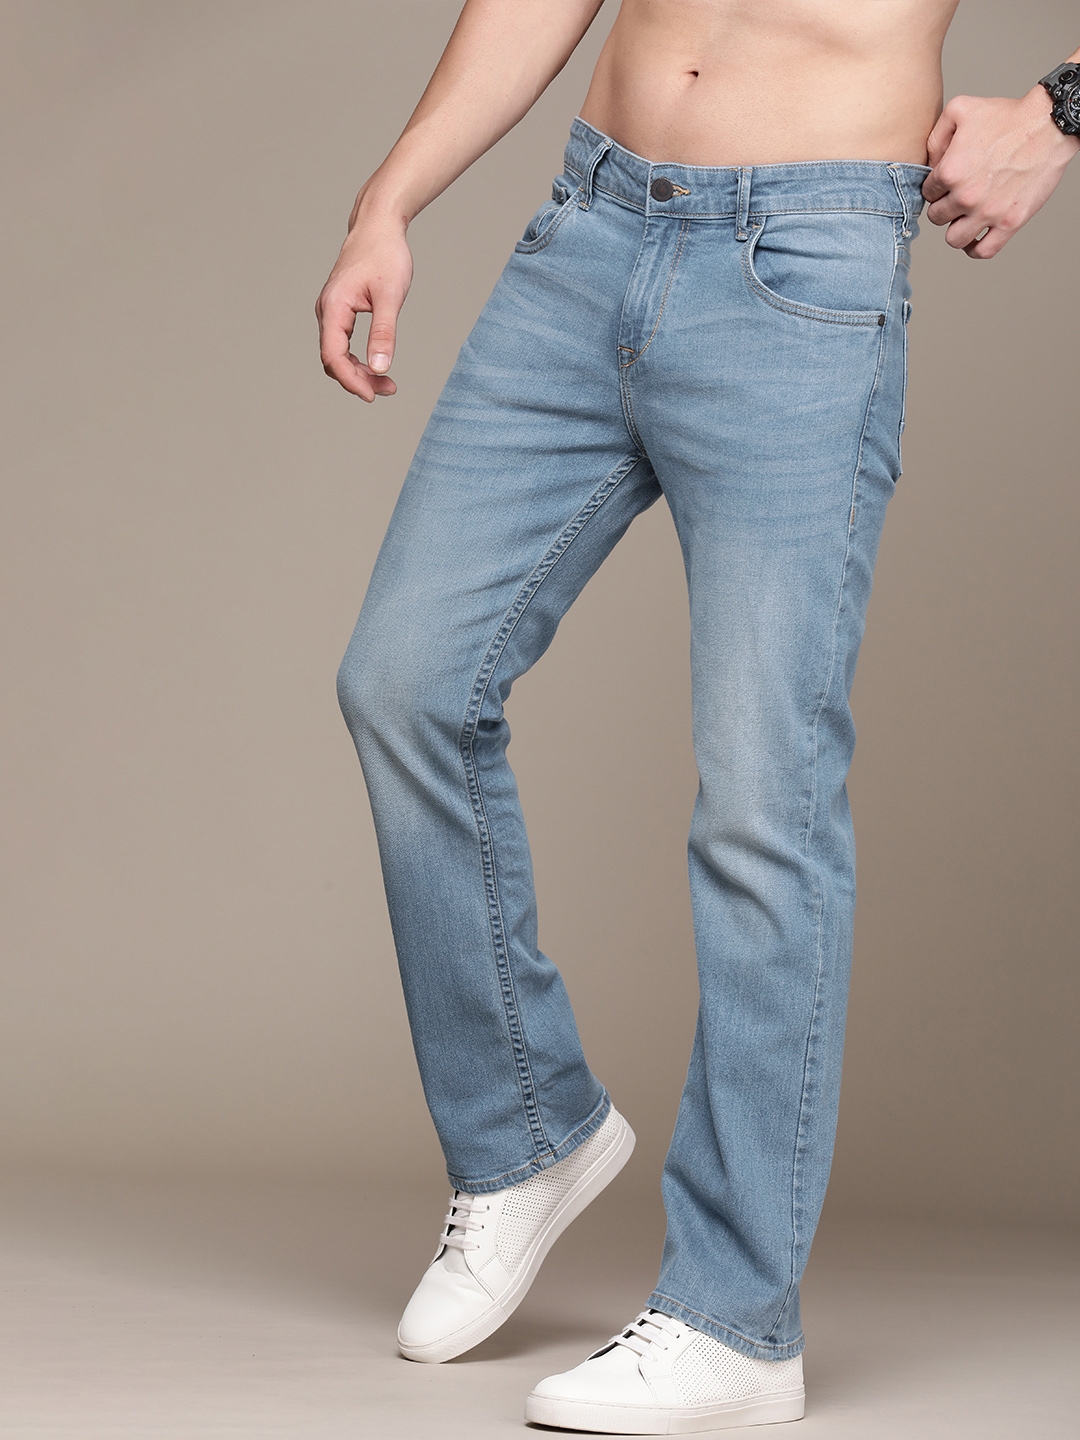 Discover more than 122 bootcut jeans men super hot